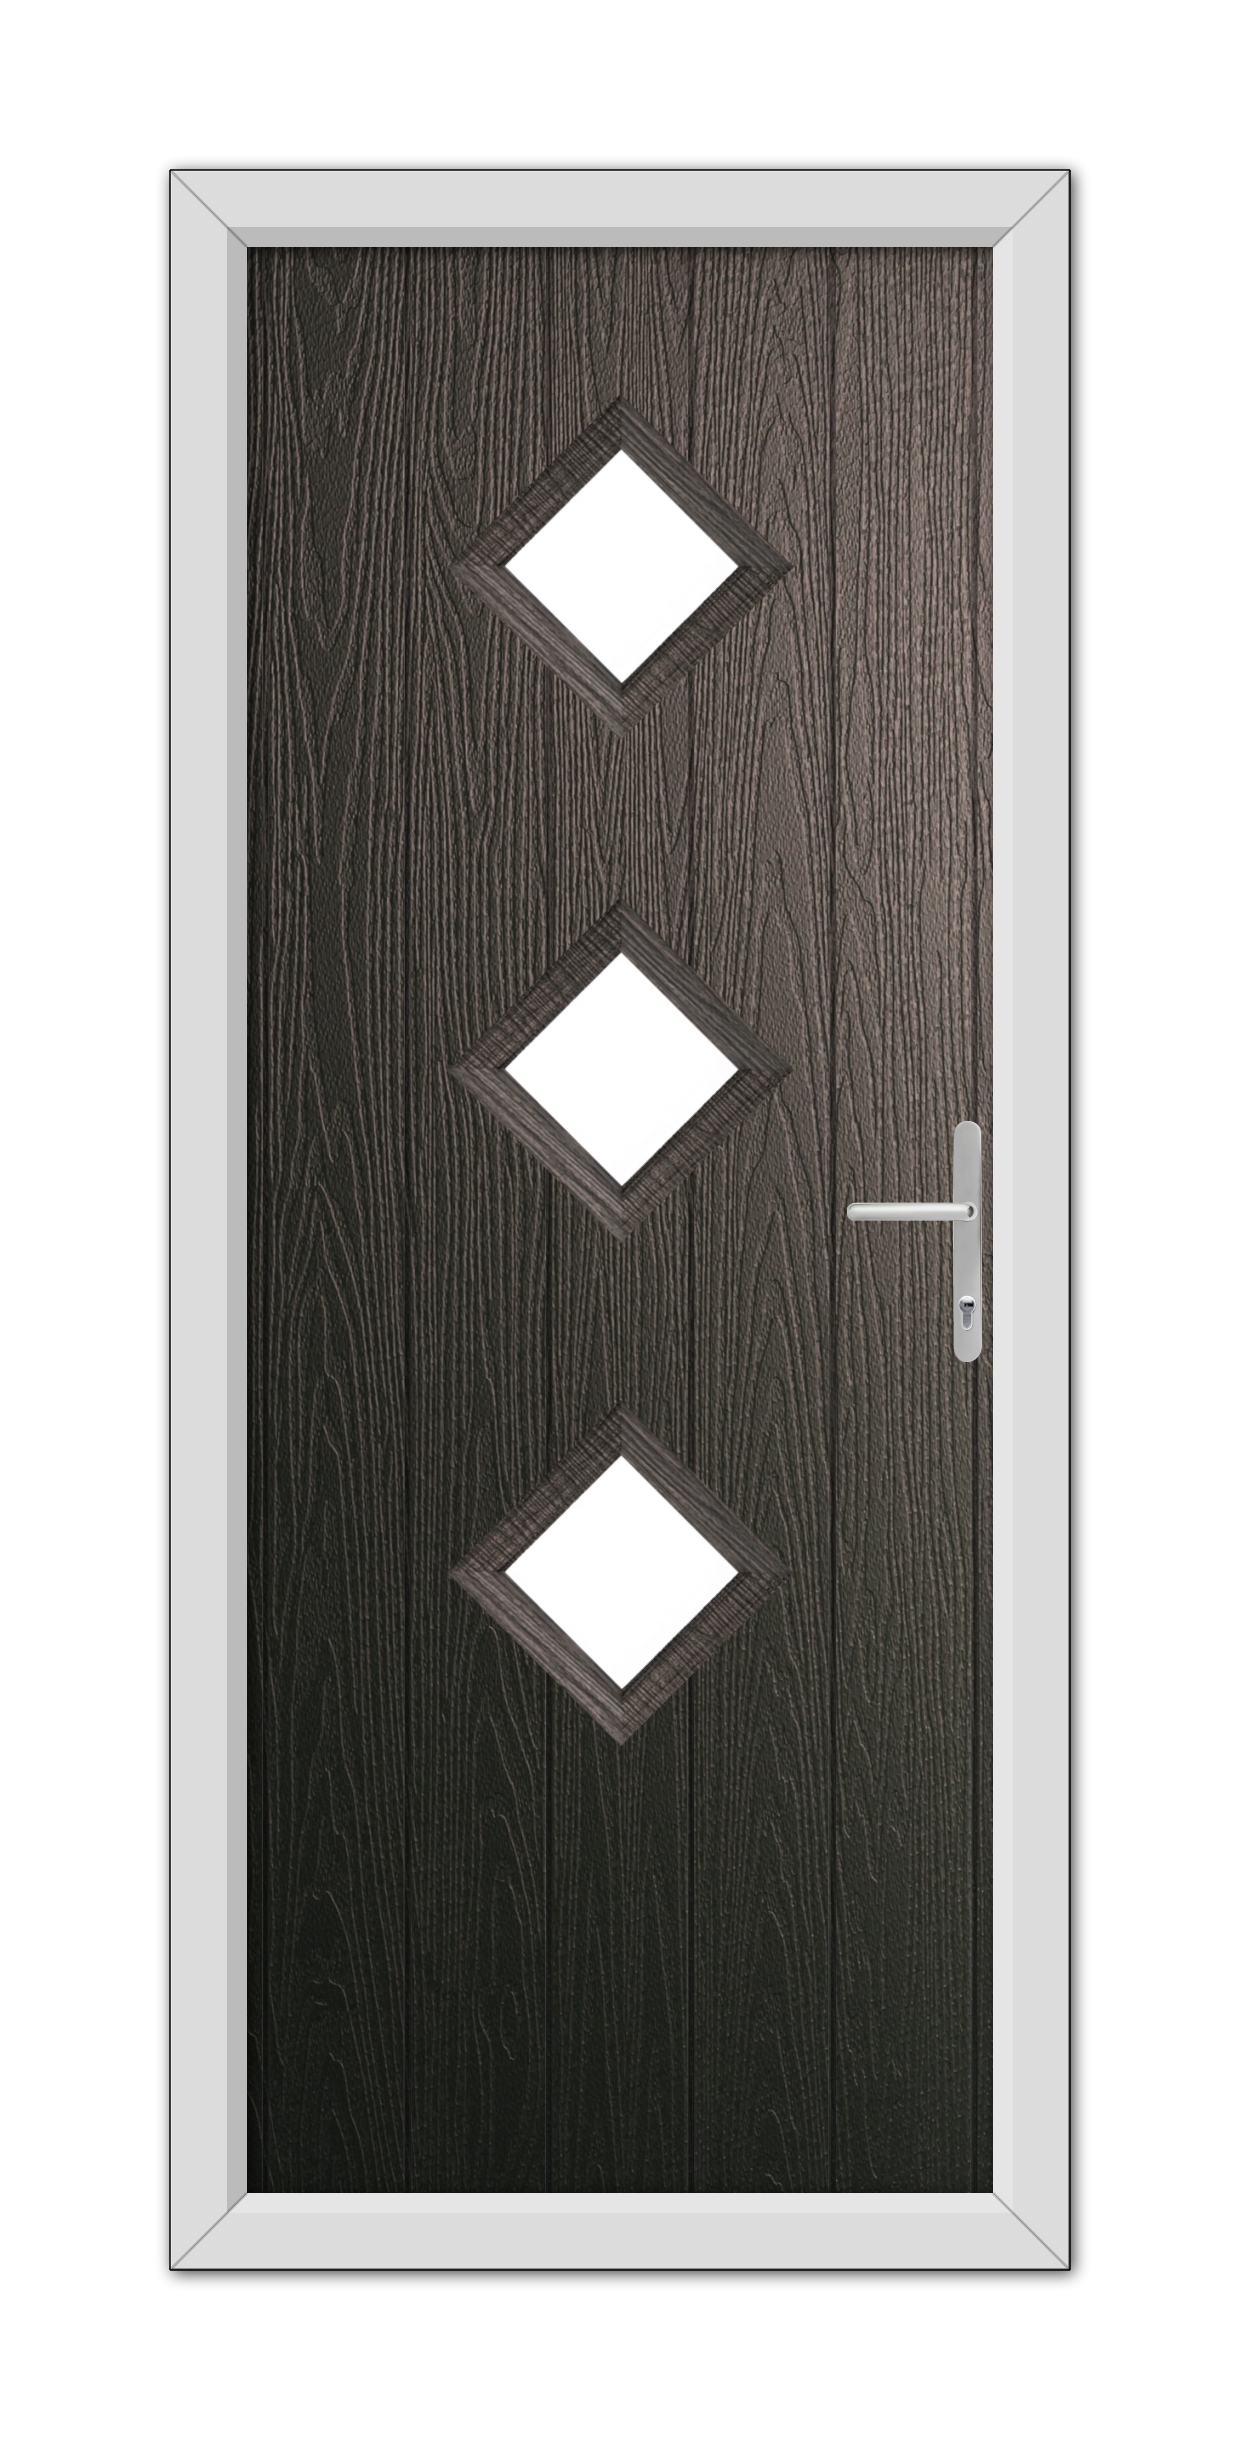 A modern Schwarzbraun Richmond Composite Door 48mm Timber Core featuring three diamond-shaped windows and a contemporary handle, set within a light gray frame.